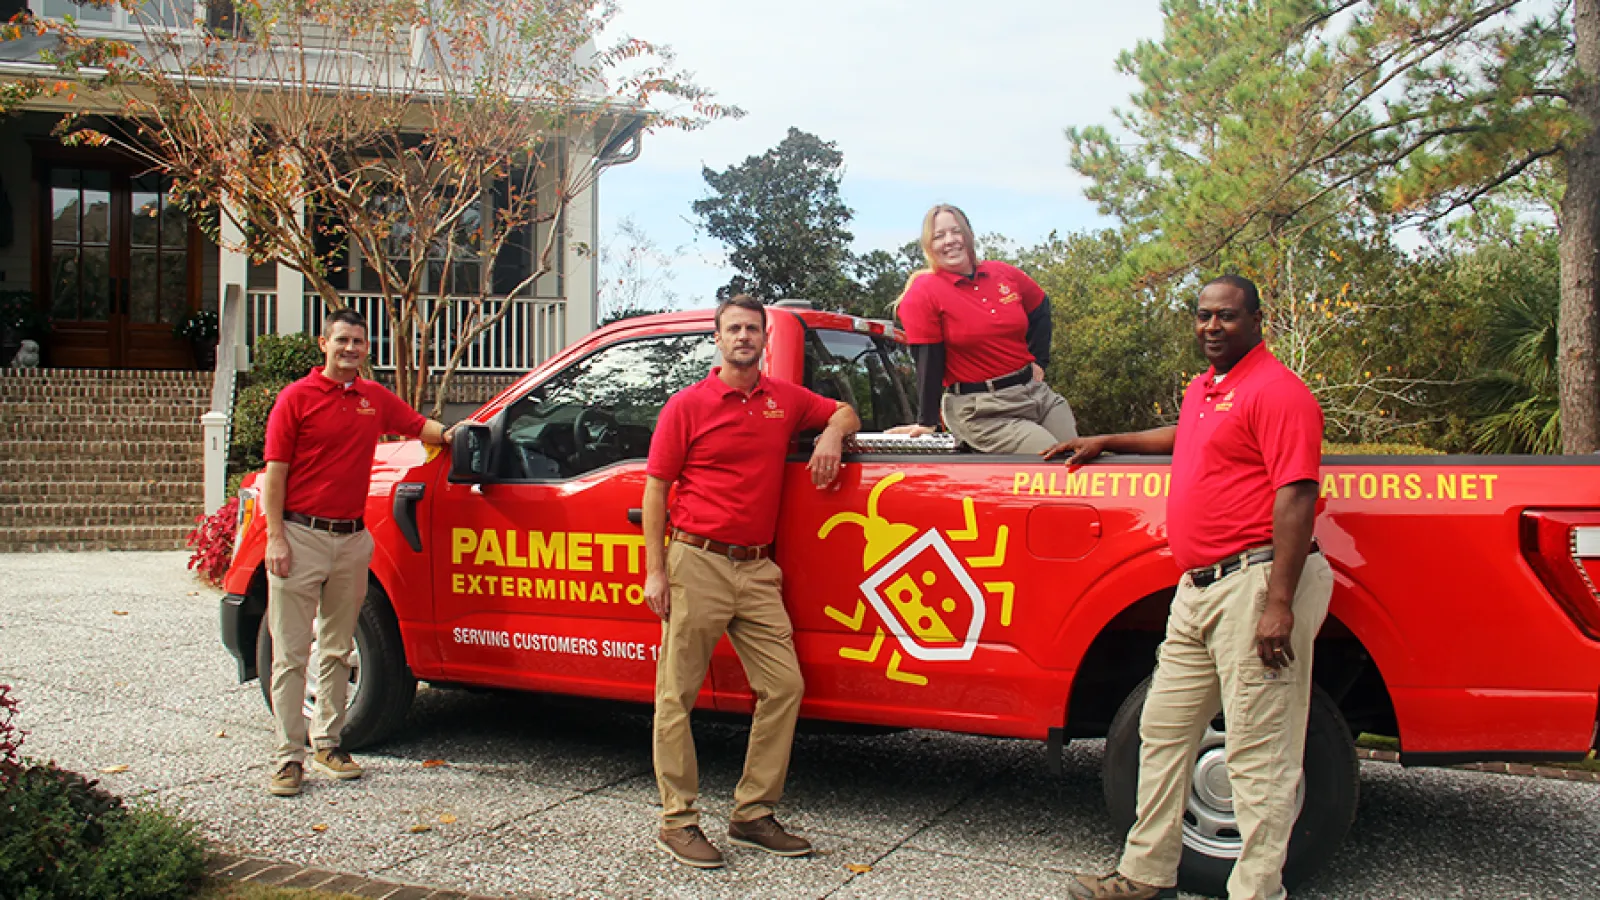 Palmetto team member in front of a truck